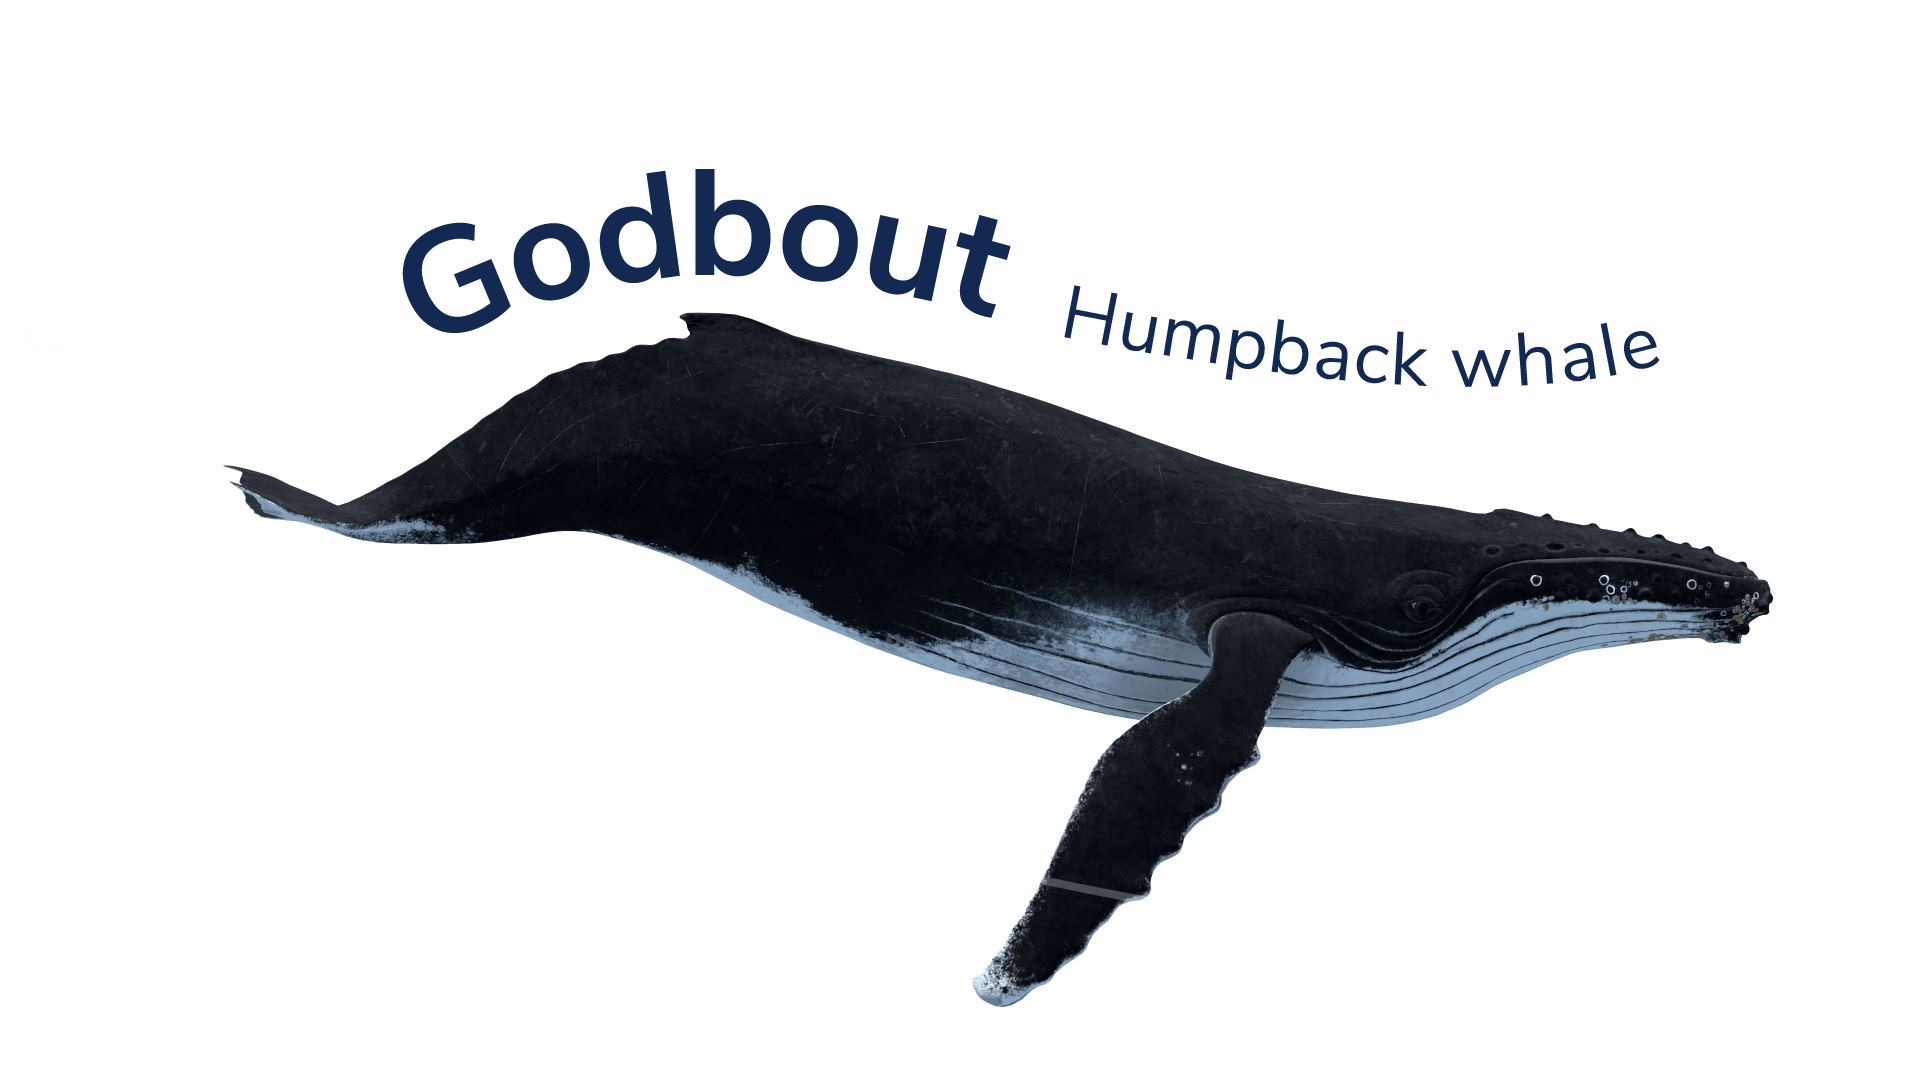 The humpback whale Godbout